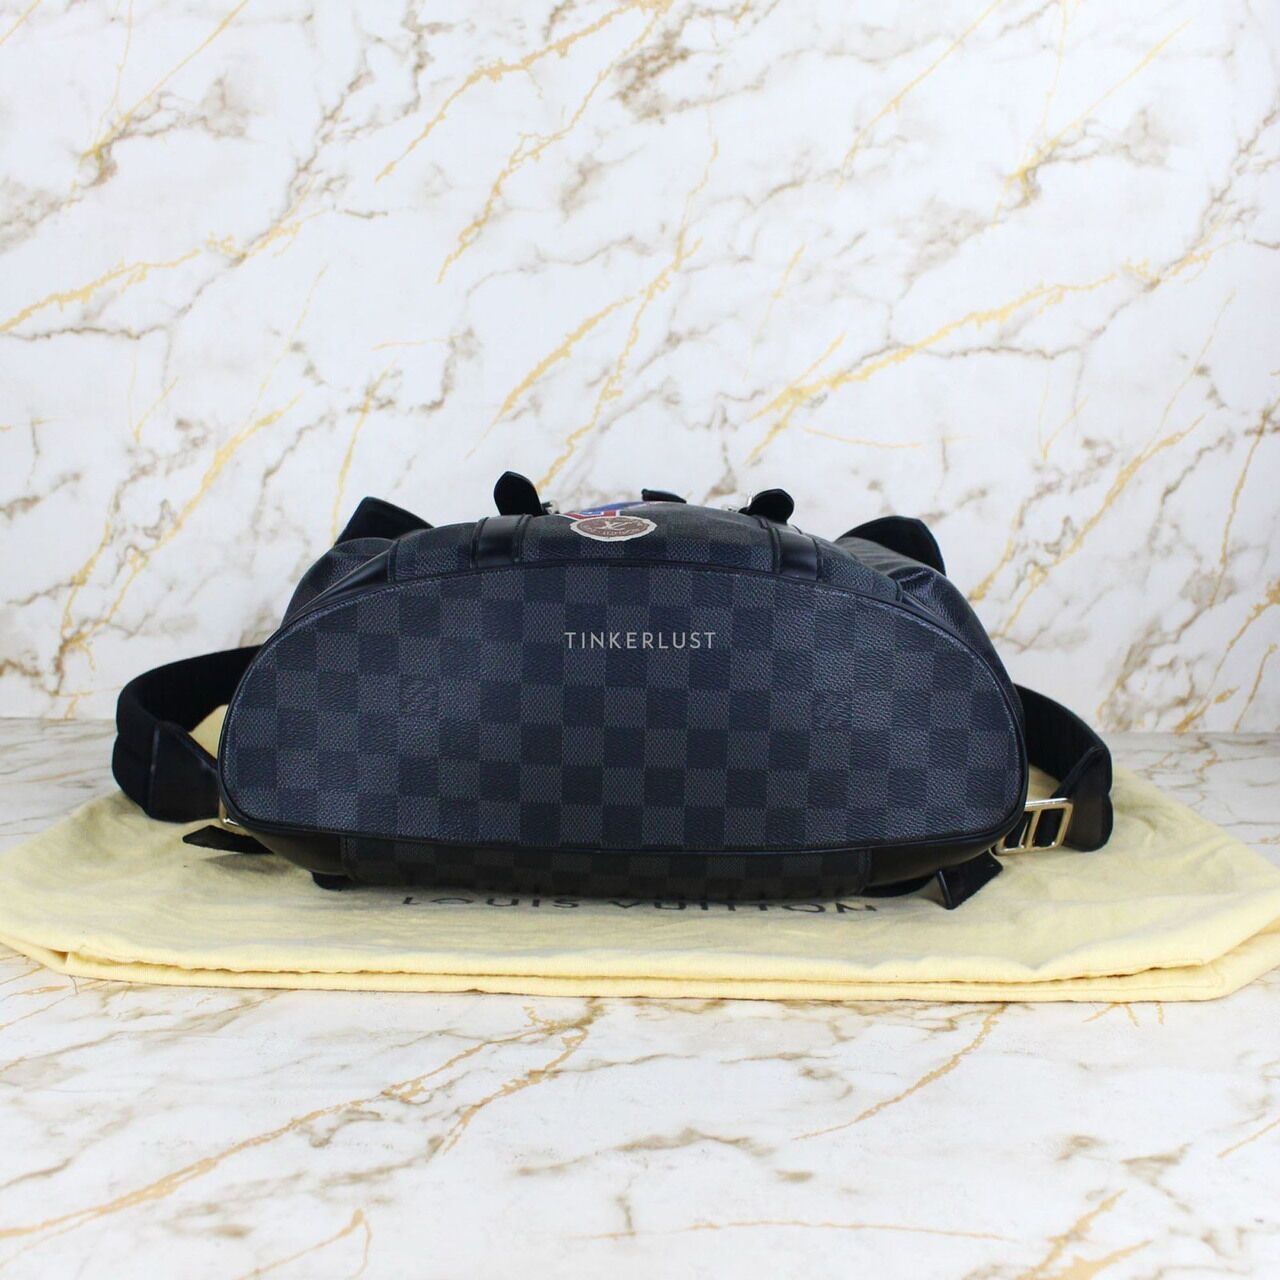 Louis Vuitton Christoper Damier Limited Edition Backpack 